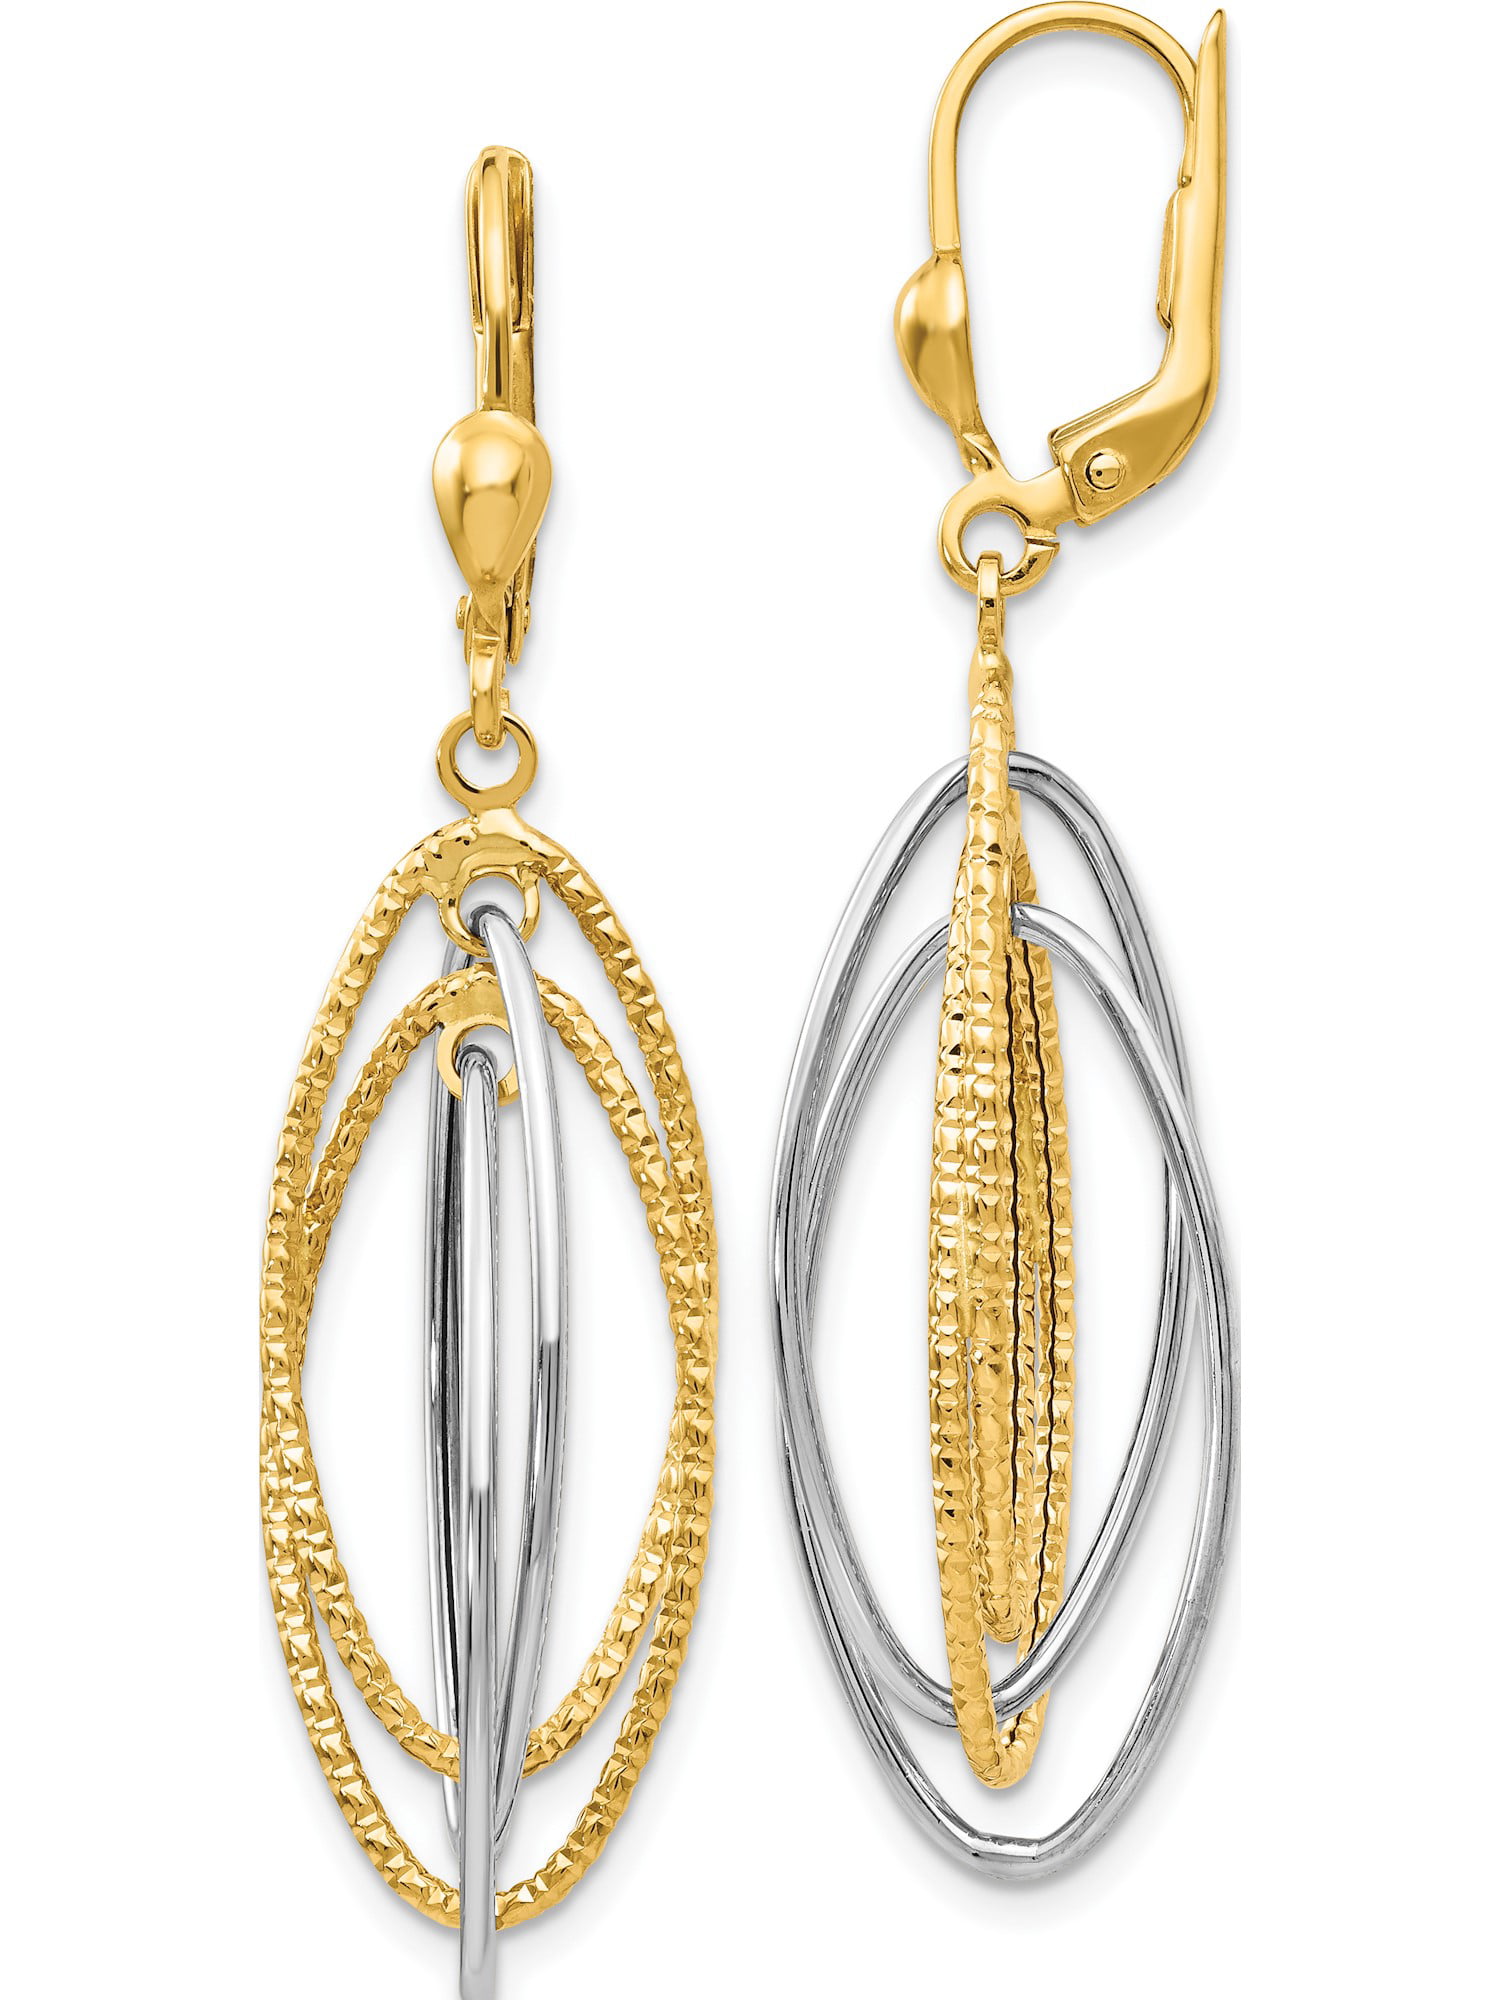 14K Two-Tone Gold Polished and Textured Dangle Leverback Earrings Approximately 41mm x 7mm